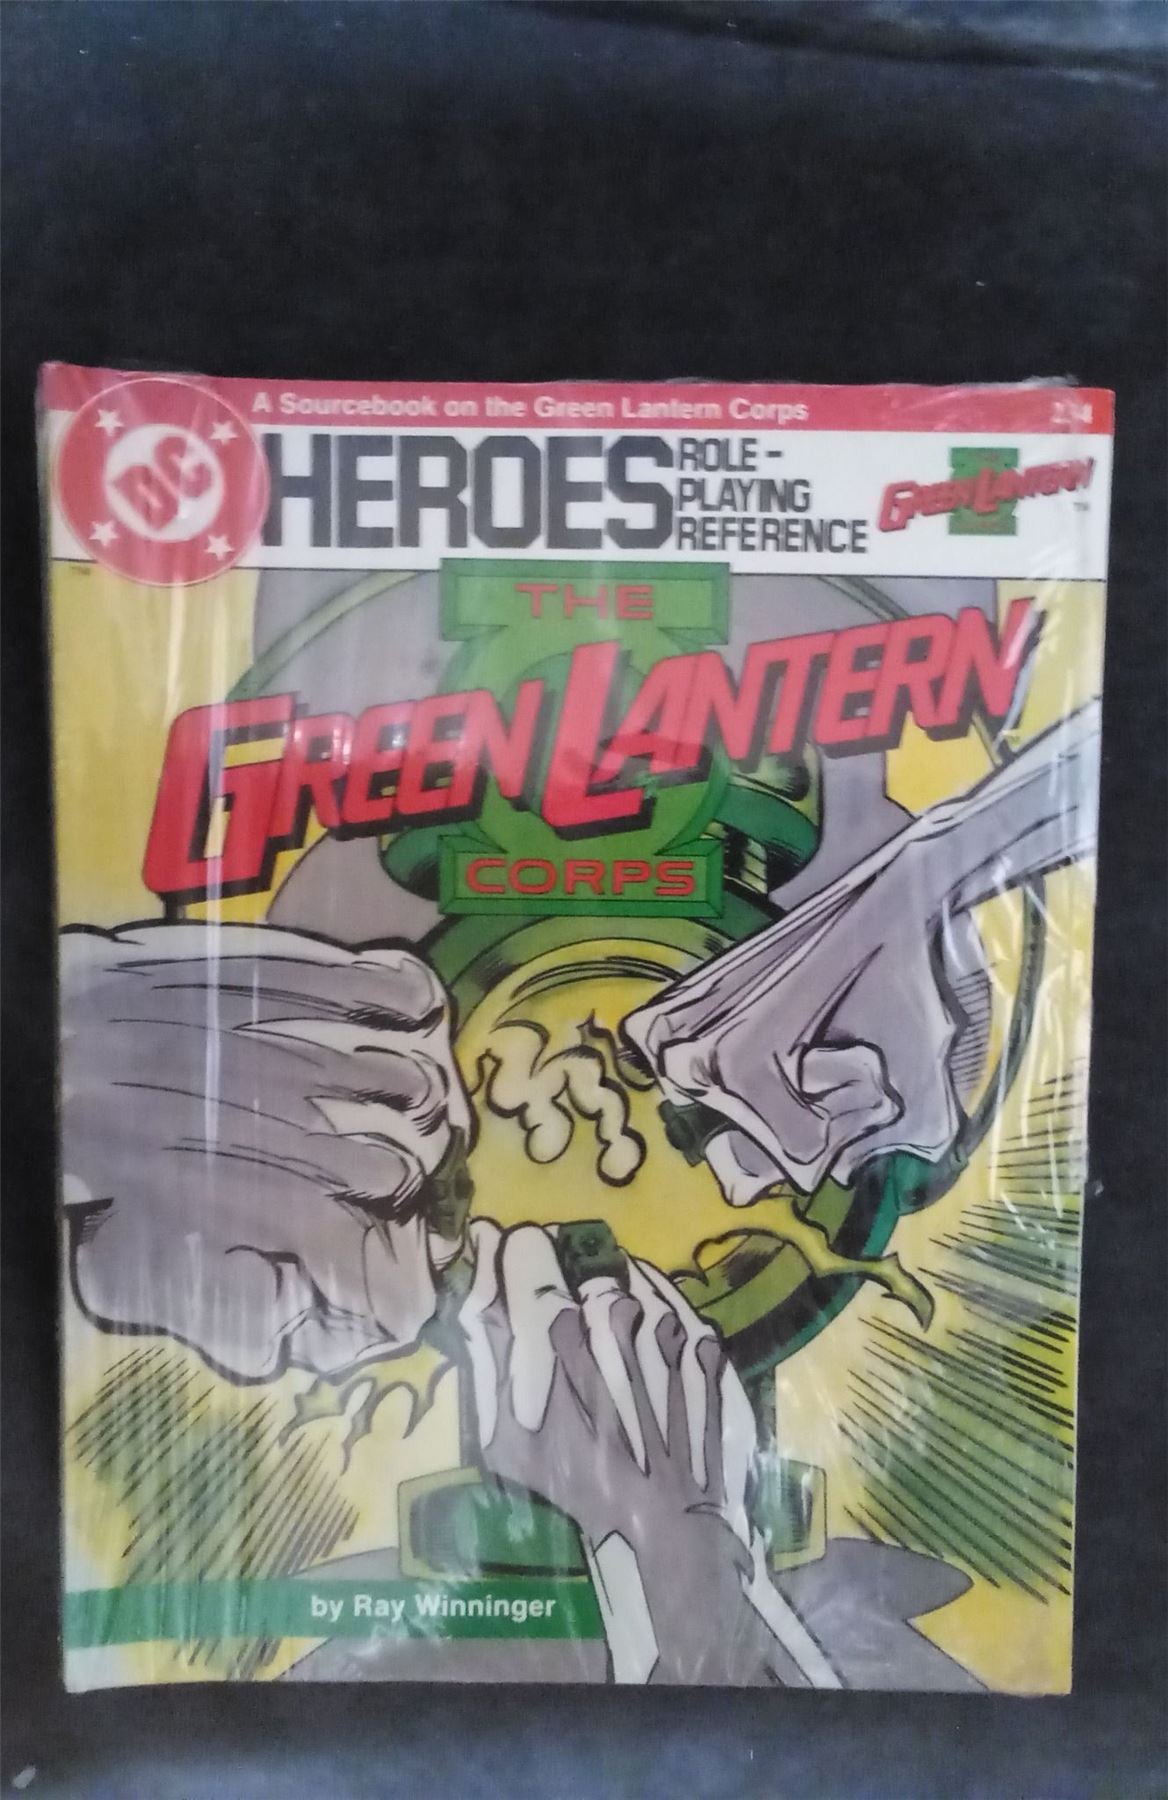 DC Heroes Role Playing Reference Green Lantern Corps  Comic Book